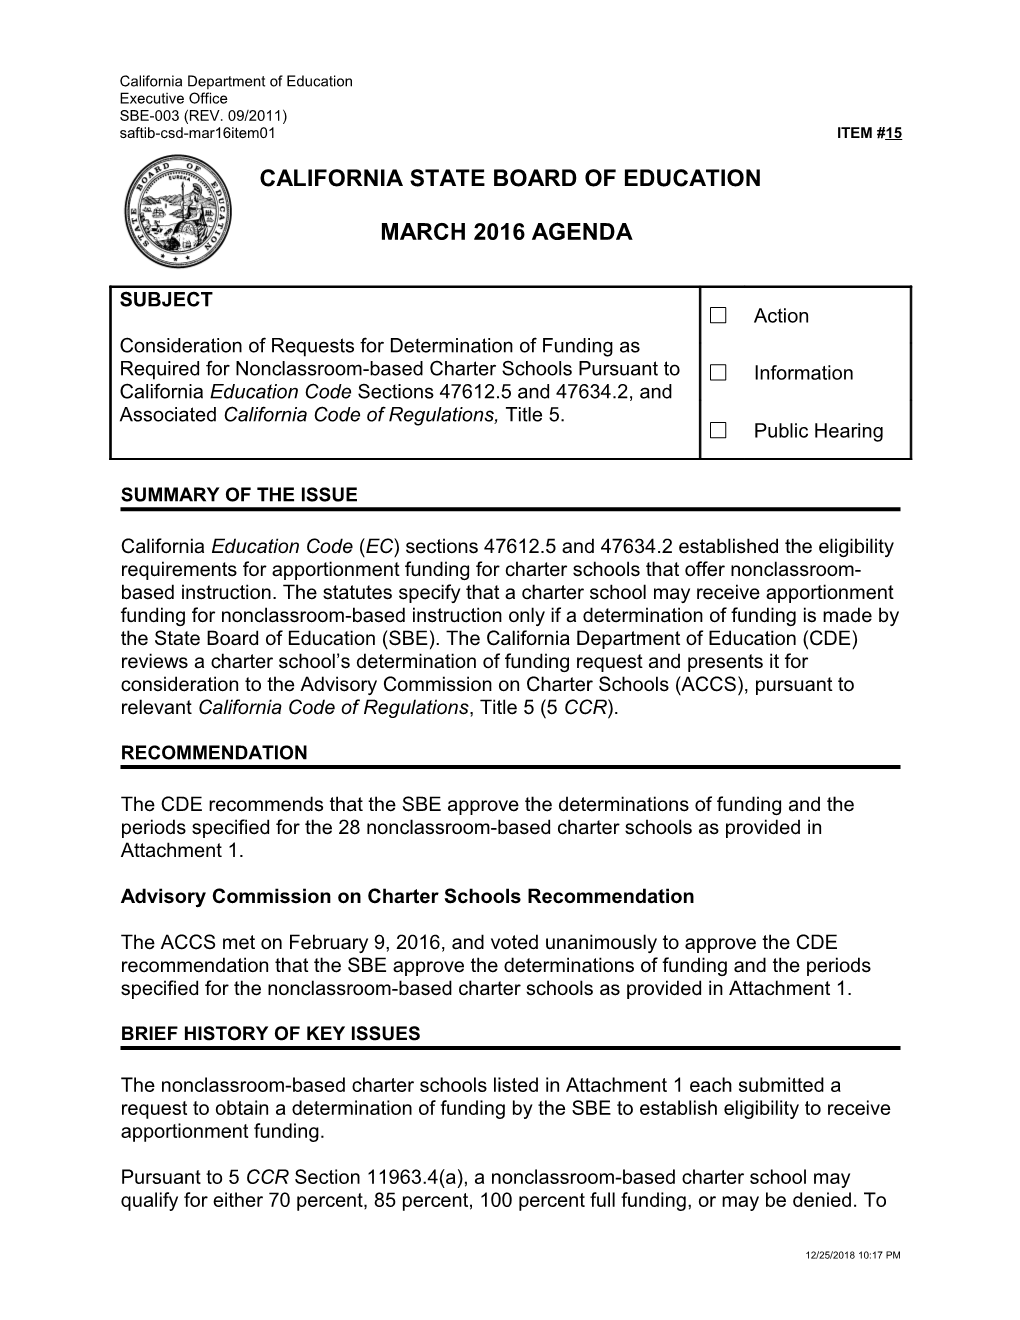 March 2016 Agenda Item 15 - Meeting Agendas (CA State Board of Education)